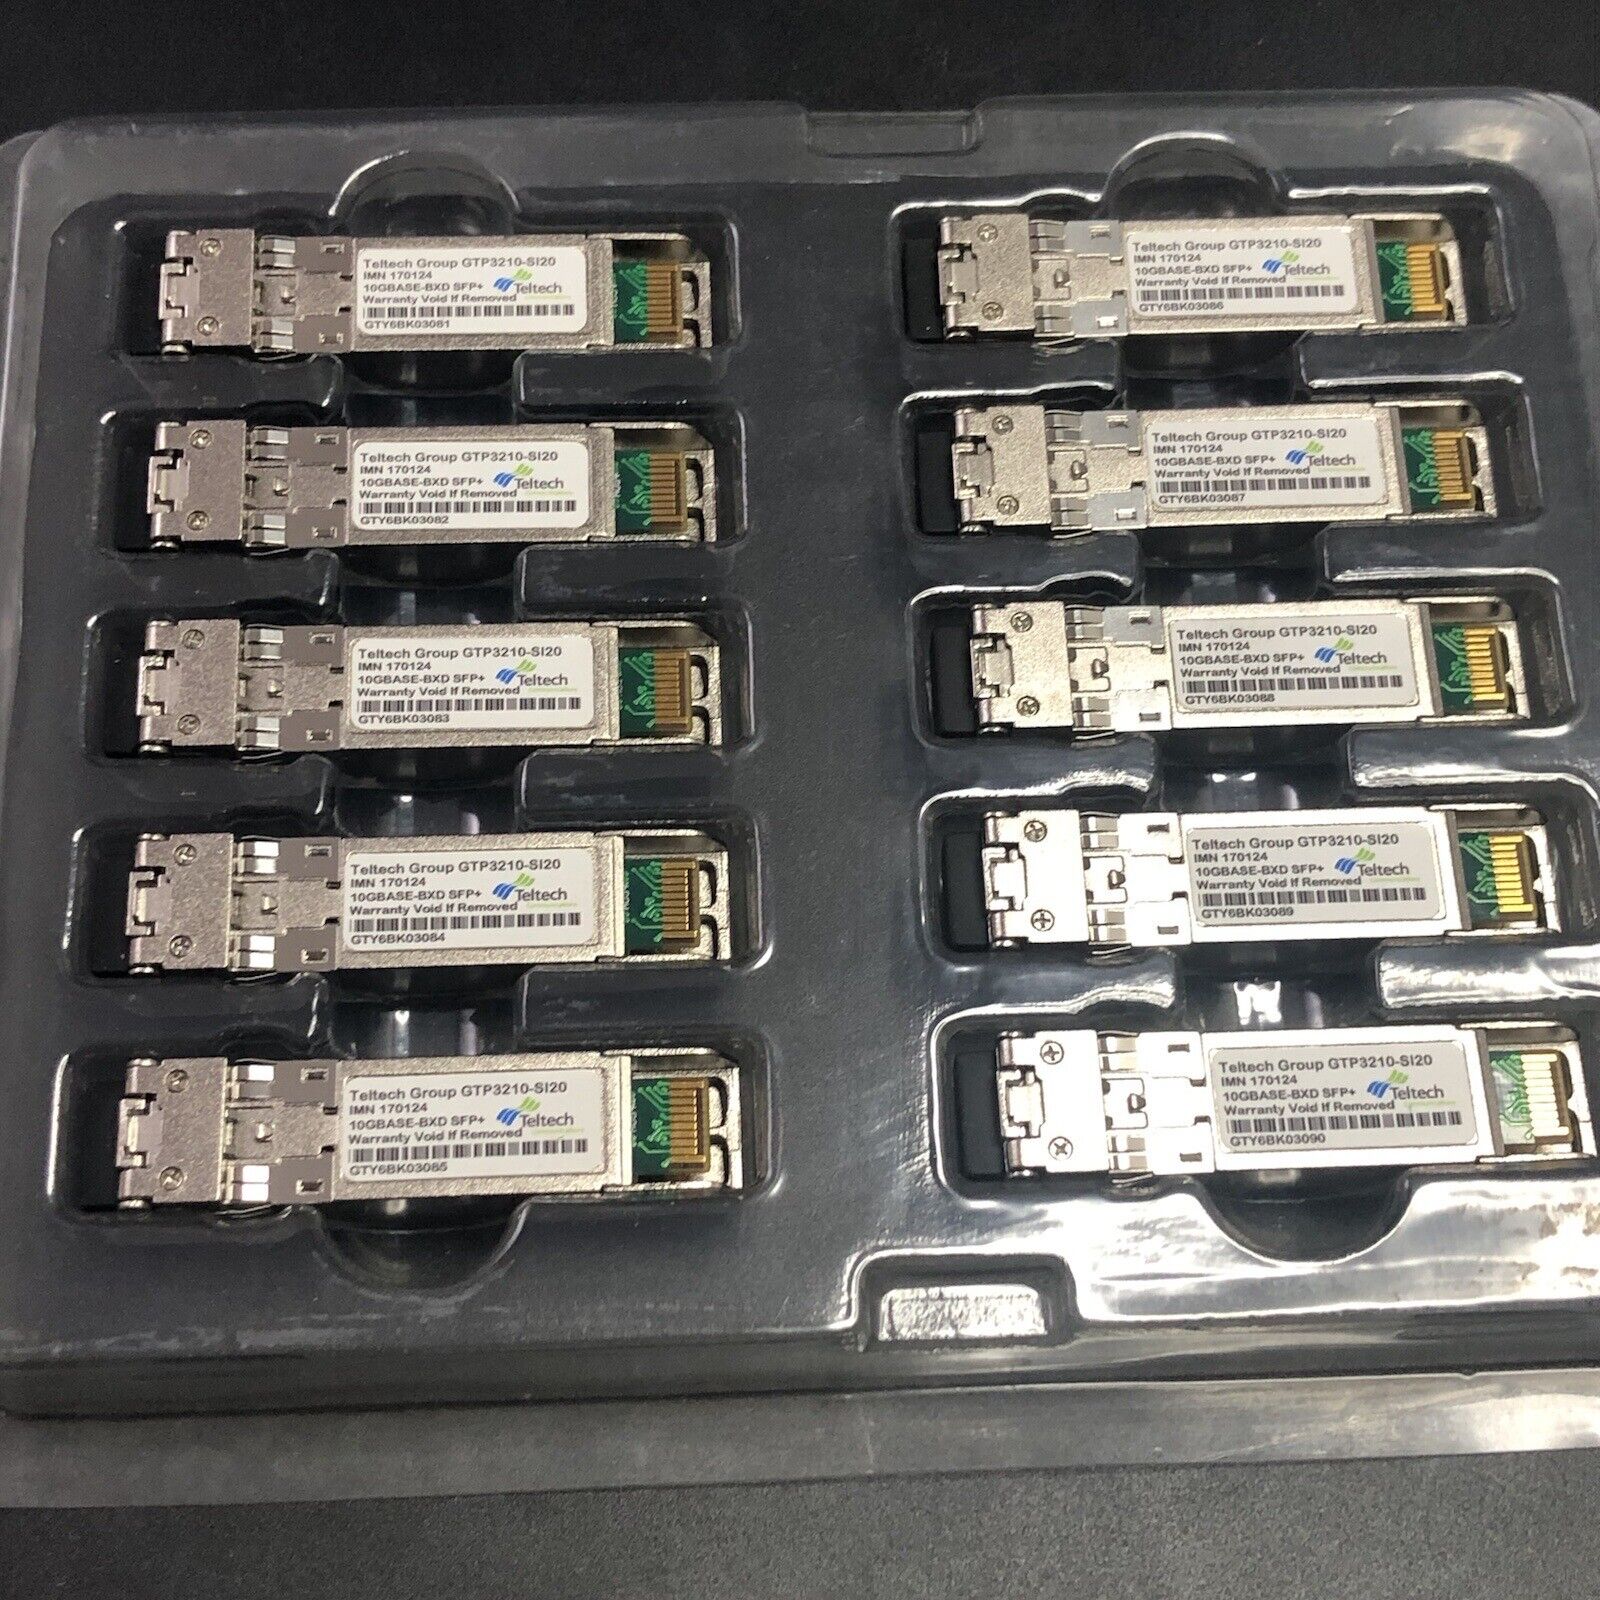 LOT of 10 Teltech Group GTP3210-SI20 10GBASE-BXD SFP+ 1330nm/1270nm 20km Vf7